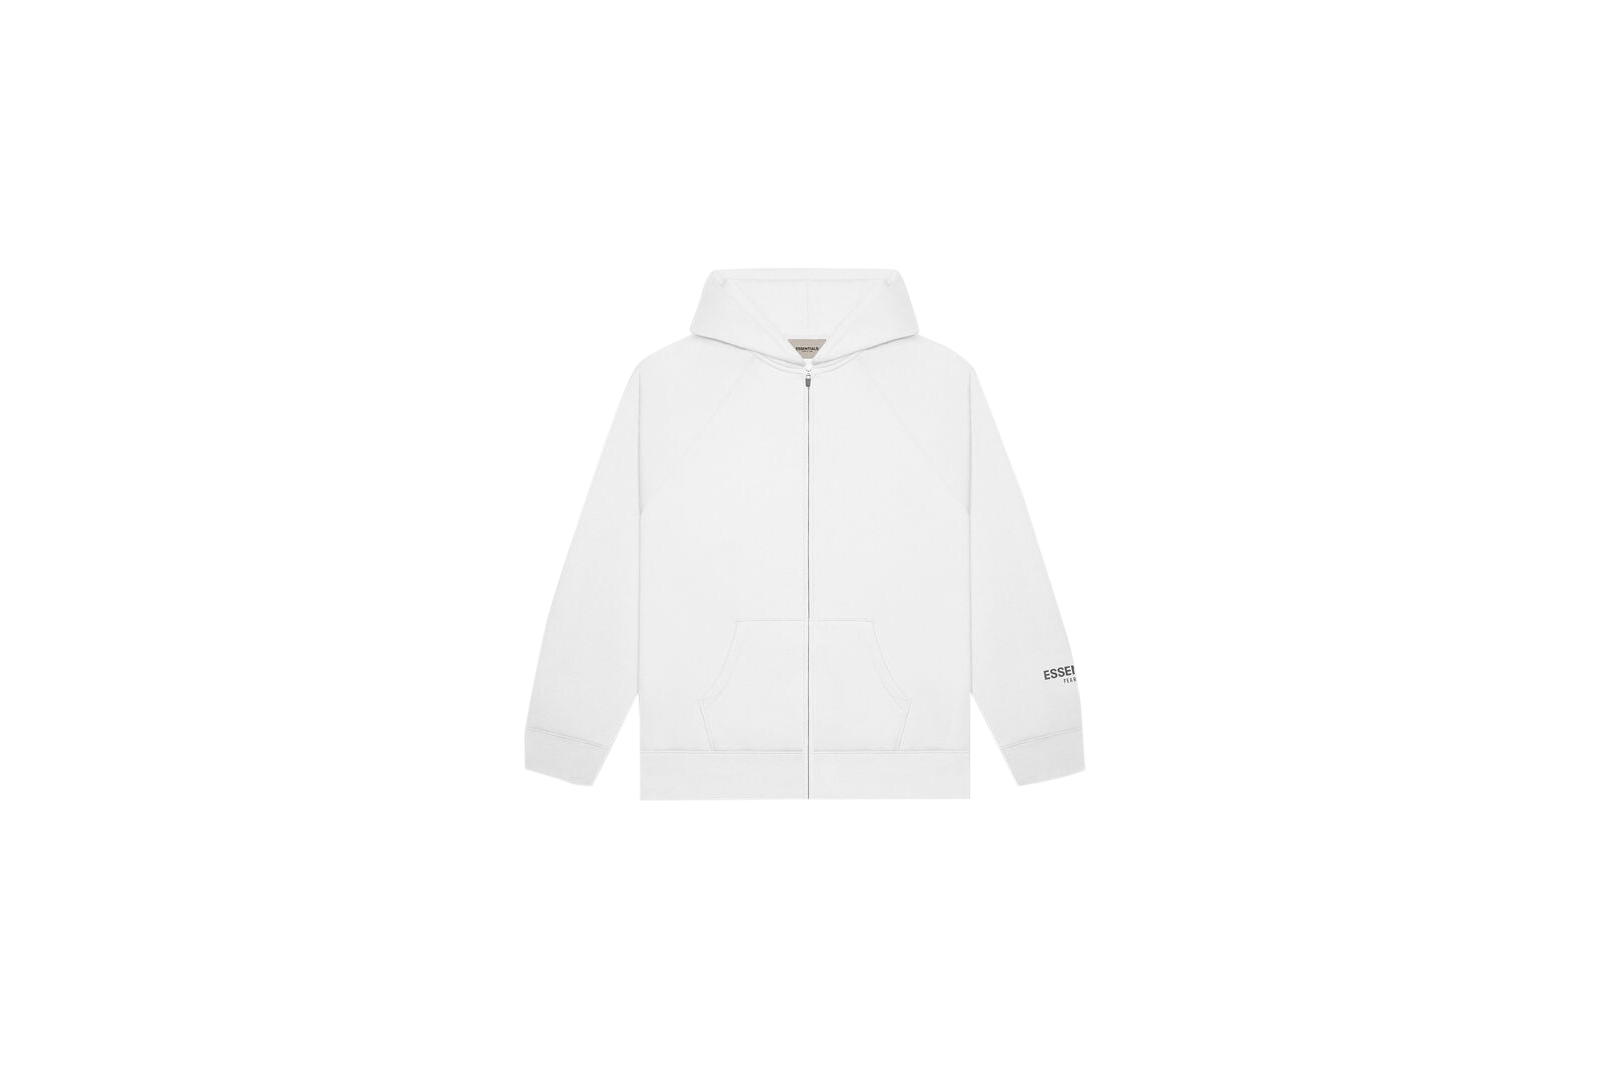 Fear of God Essentials 3D Silicon Applique Full Zip Up Hoodie ...